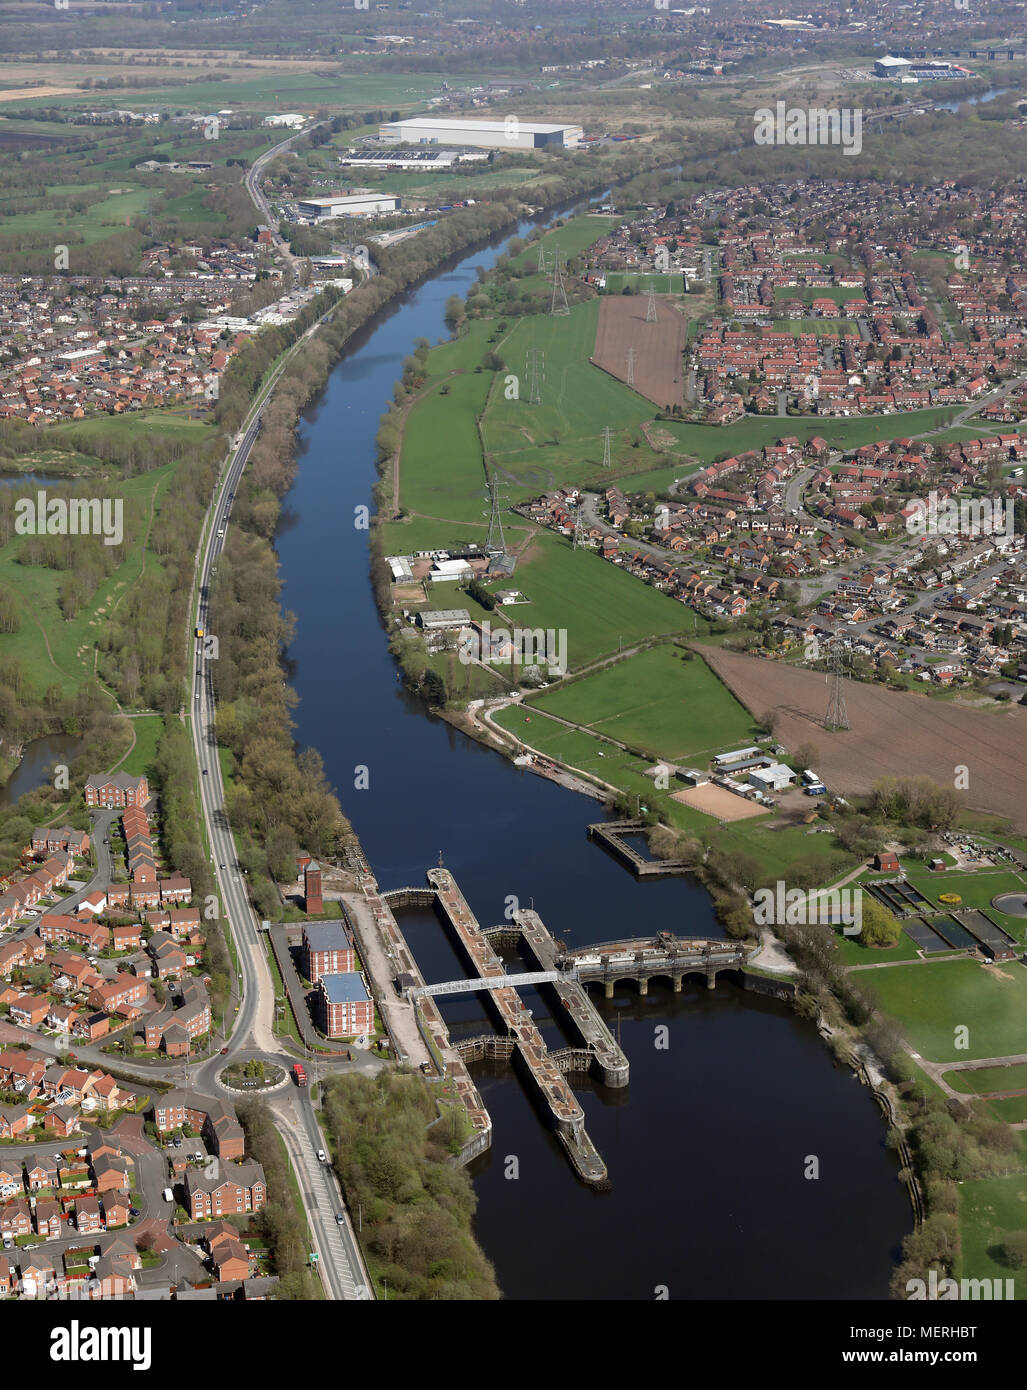 aerial view looking east up The Manchester Ship Canal at Irlam near Manchester, UK Stock Photo